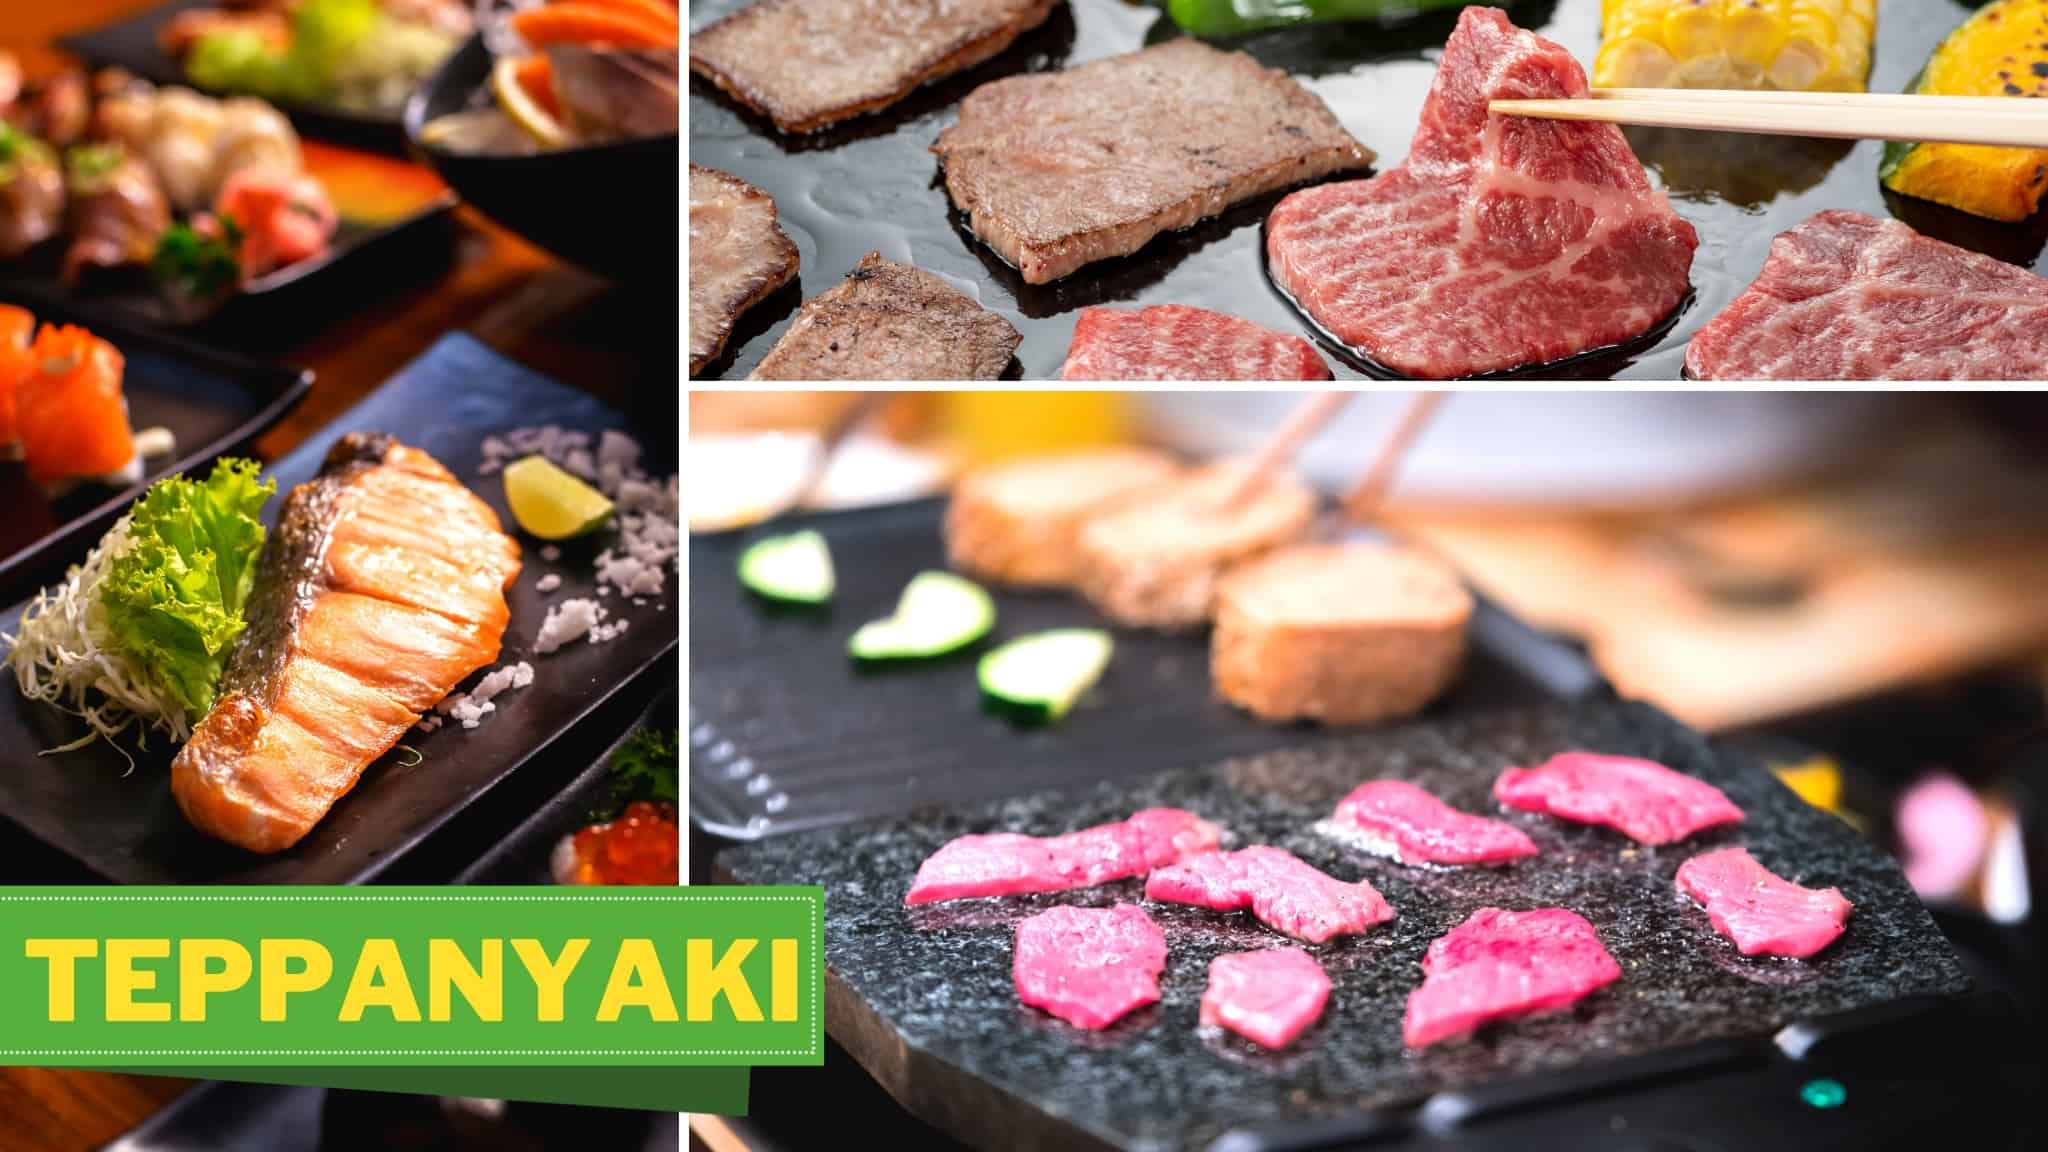 9 best Teppanyaki grills for your home: electric, tabletop & more